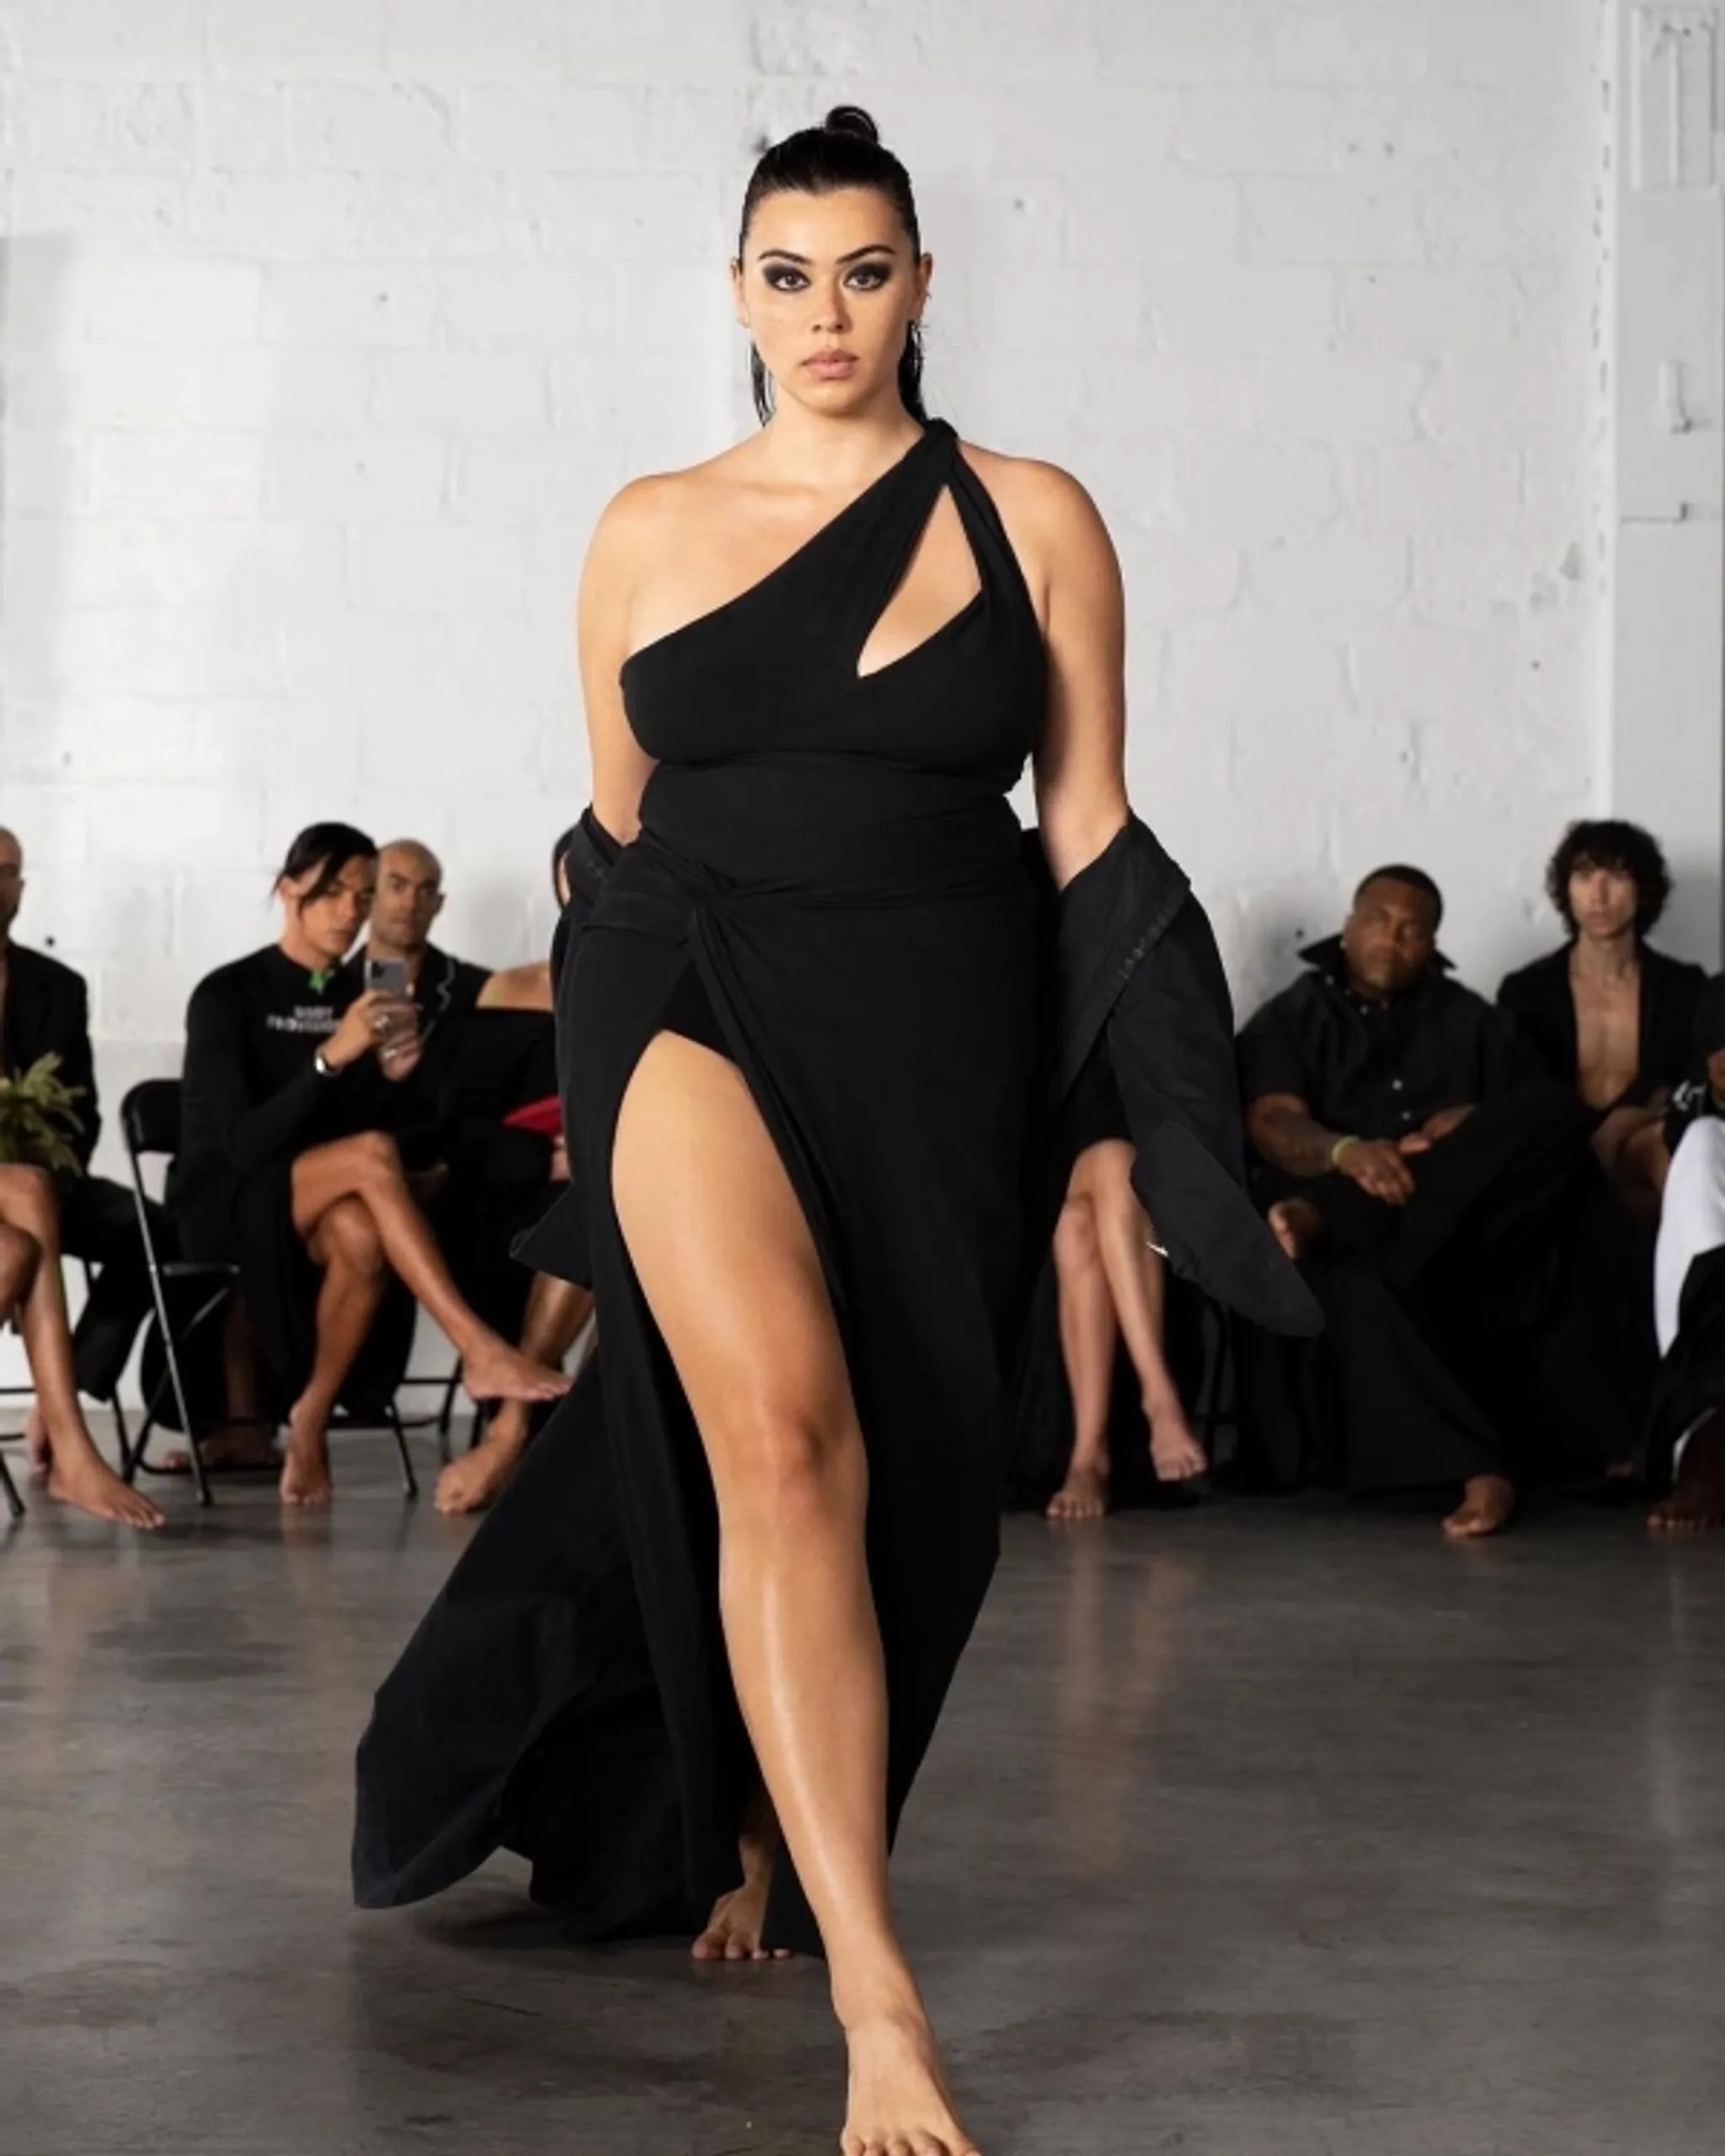 Top 10 Plus Size Models In The World #fashionmodels